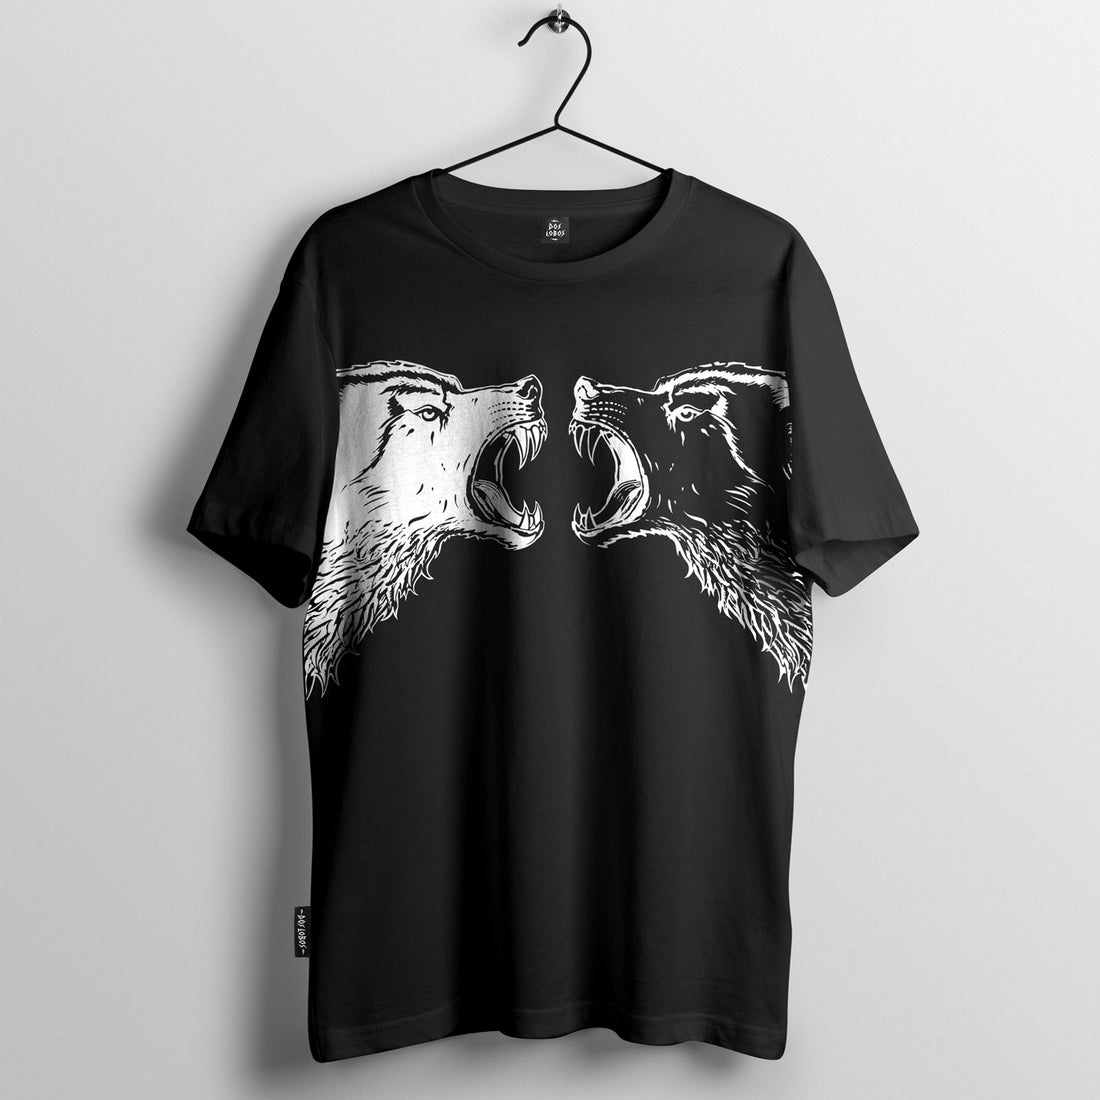 100% Black Cotton Tee by Dos Lobos - Face To Face, Savage Wolves